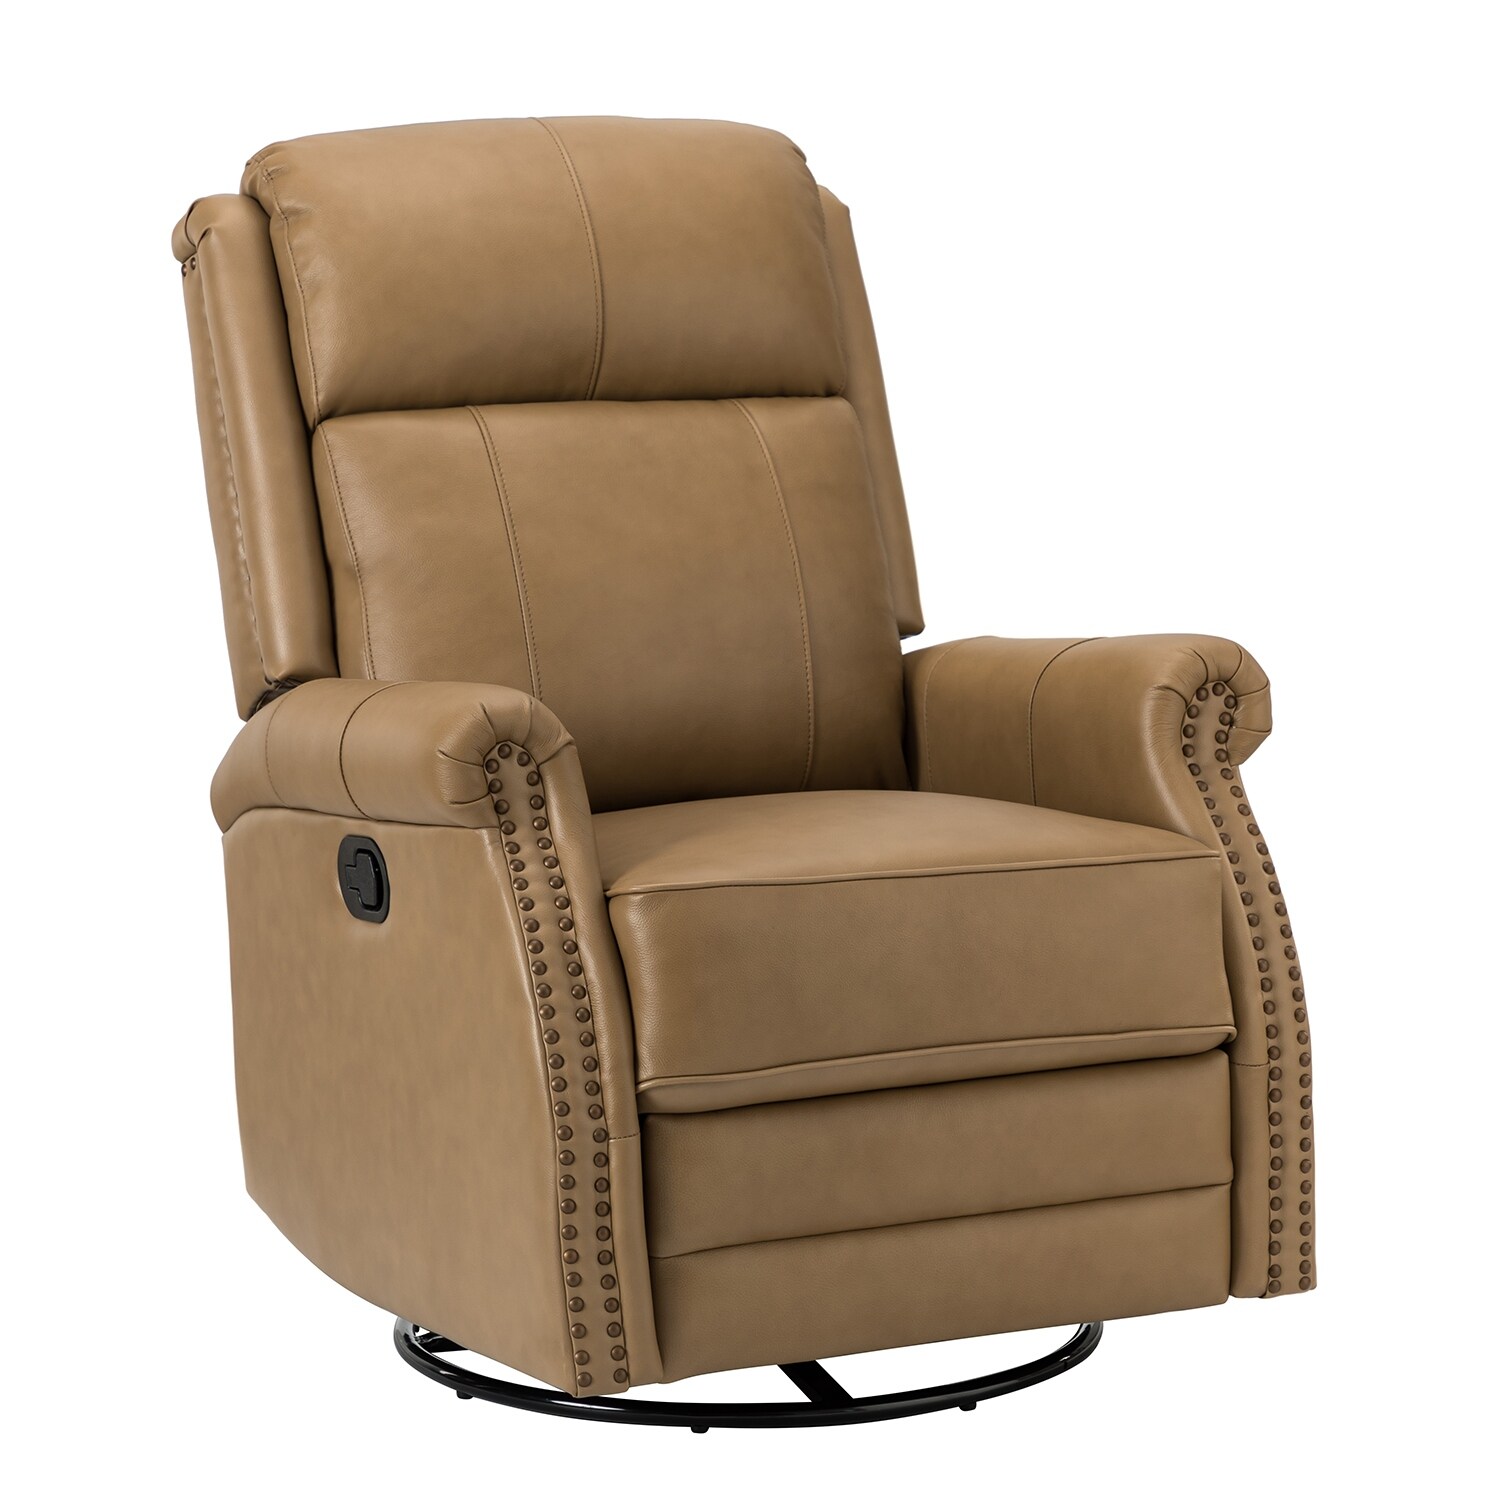 Vegan Leather Manual Swivel Rocker Glider Recliner Chair with Massage & Heat, Lumbar Pillow Included Ebern Designs Leather Type: Brown Faux Leather